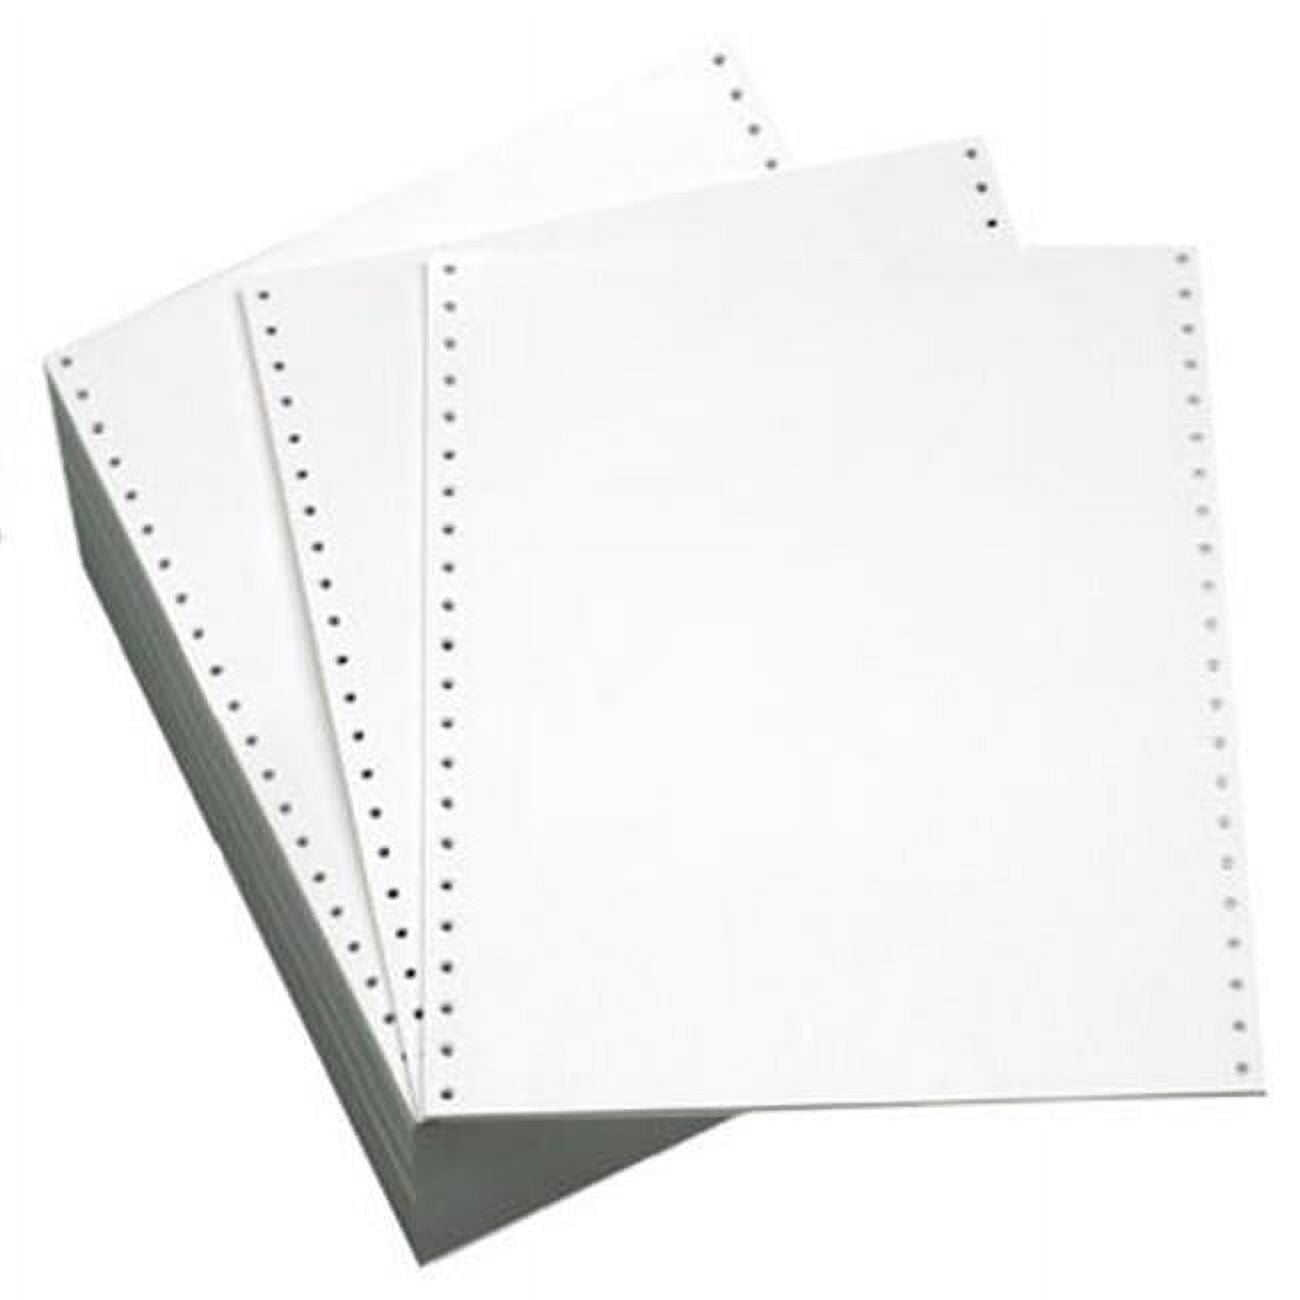 6 Pack Dry Erase Board-5.82 x 8.27 inch Small White Board- Refrigerator Whiteboard-Self-Adhesive Peel & Stick Decal Dry Erase Message Board (A5)